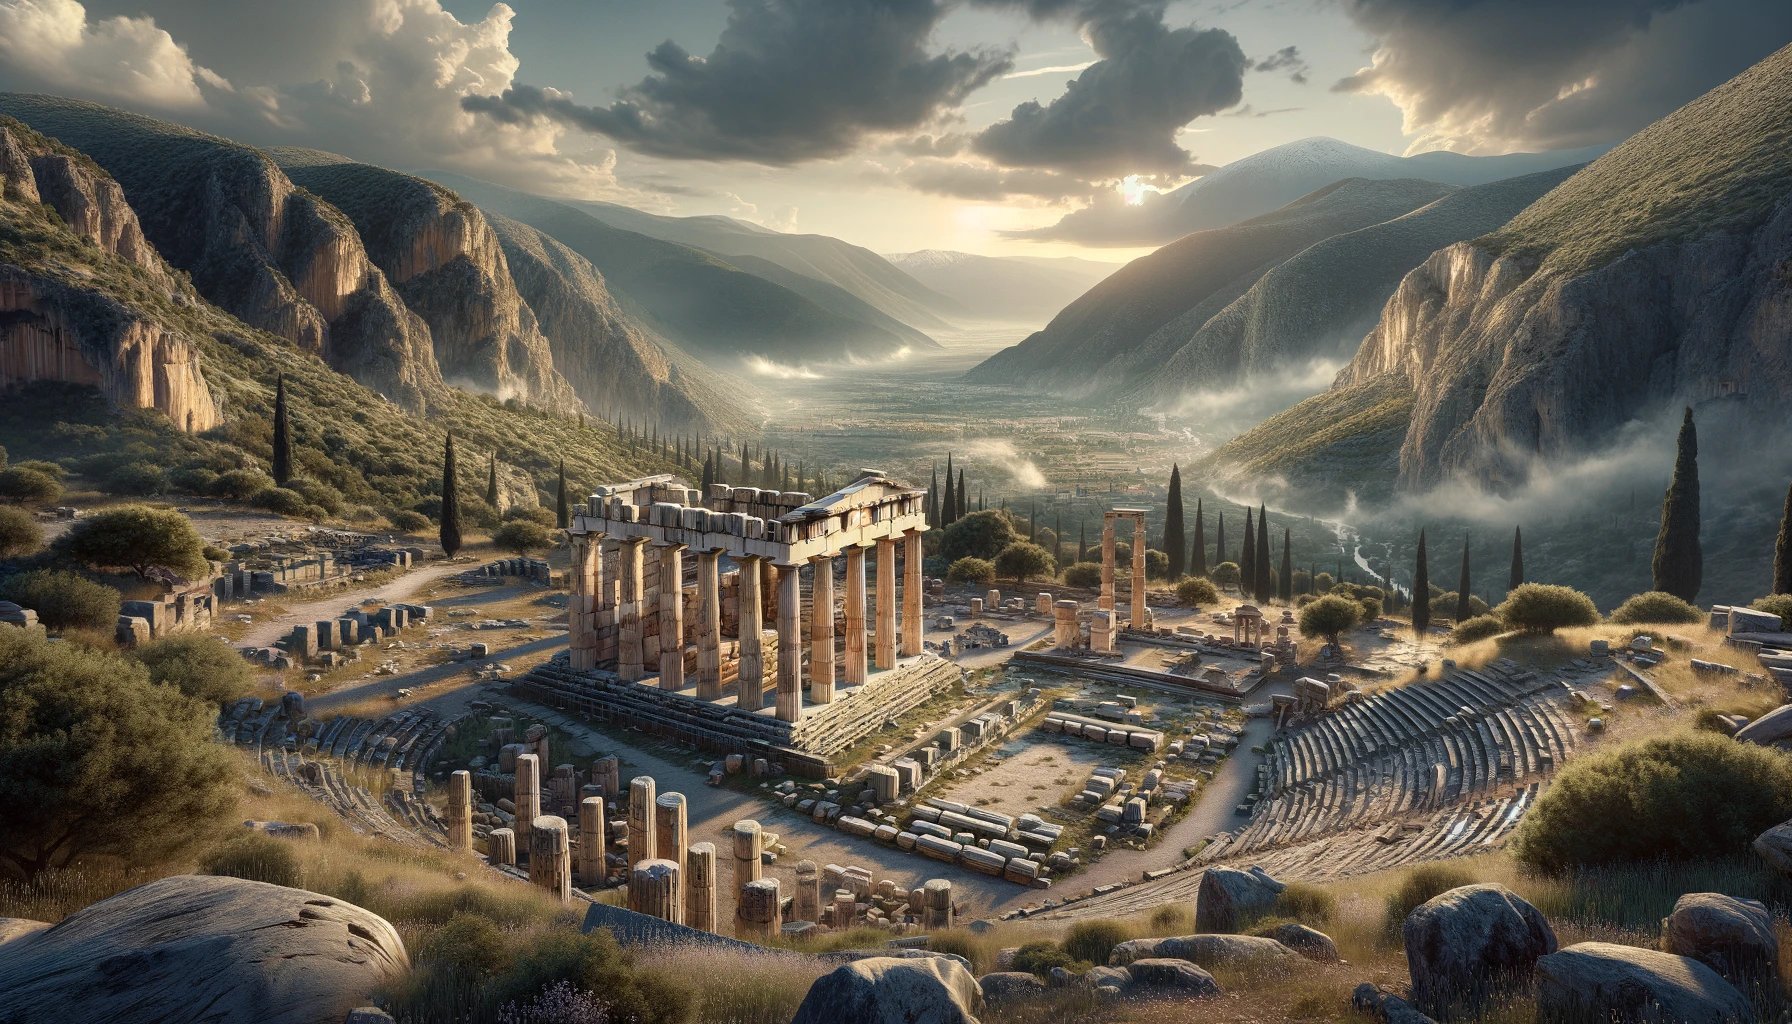 Delphi's ruins whispering tales of oracles